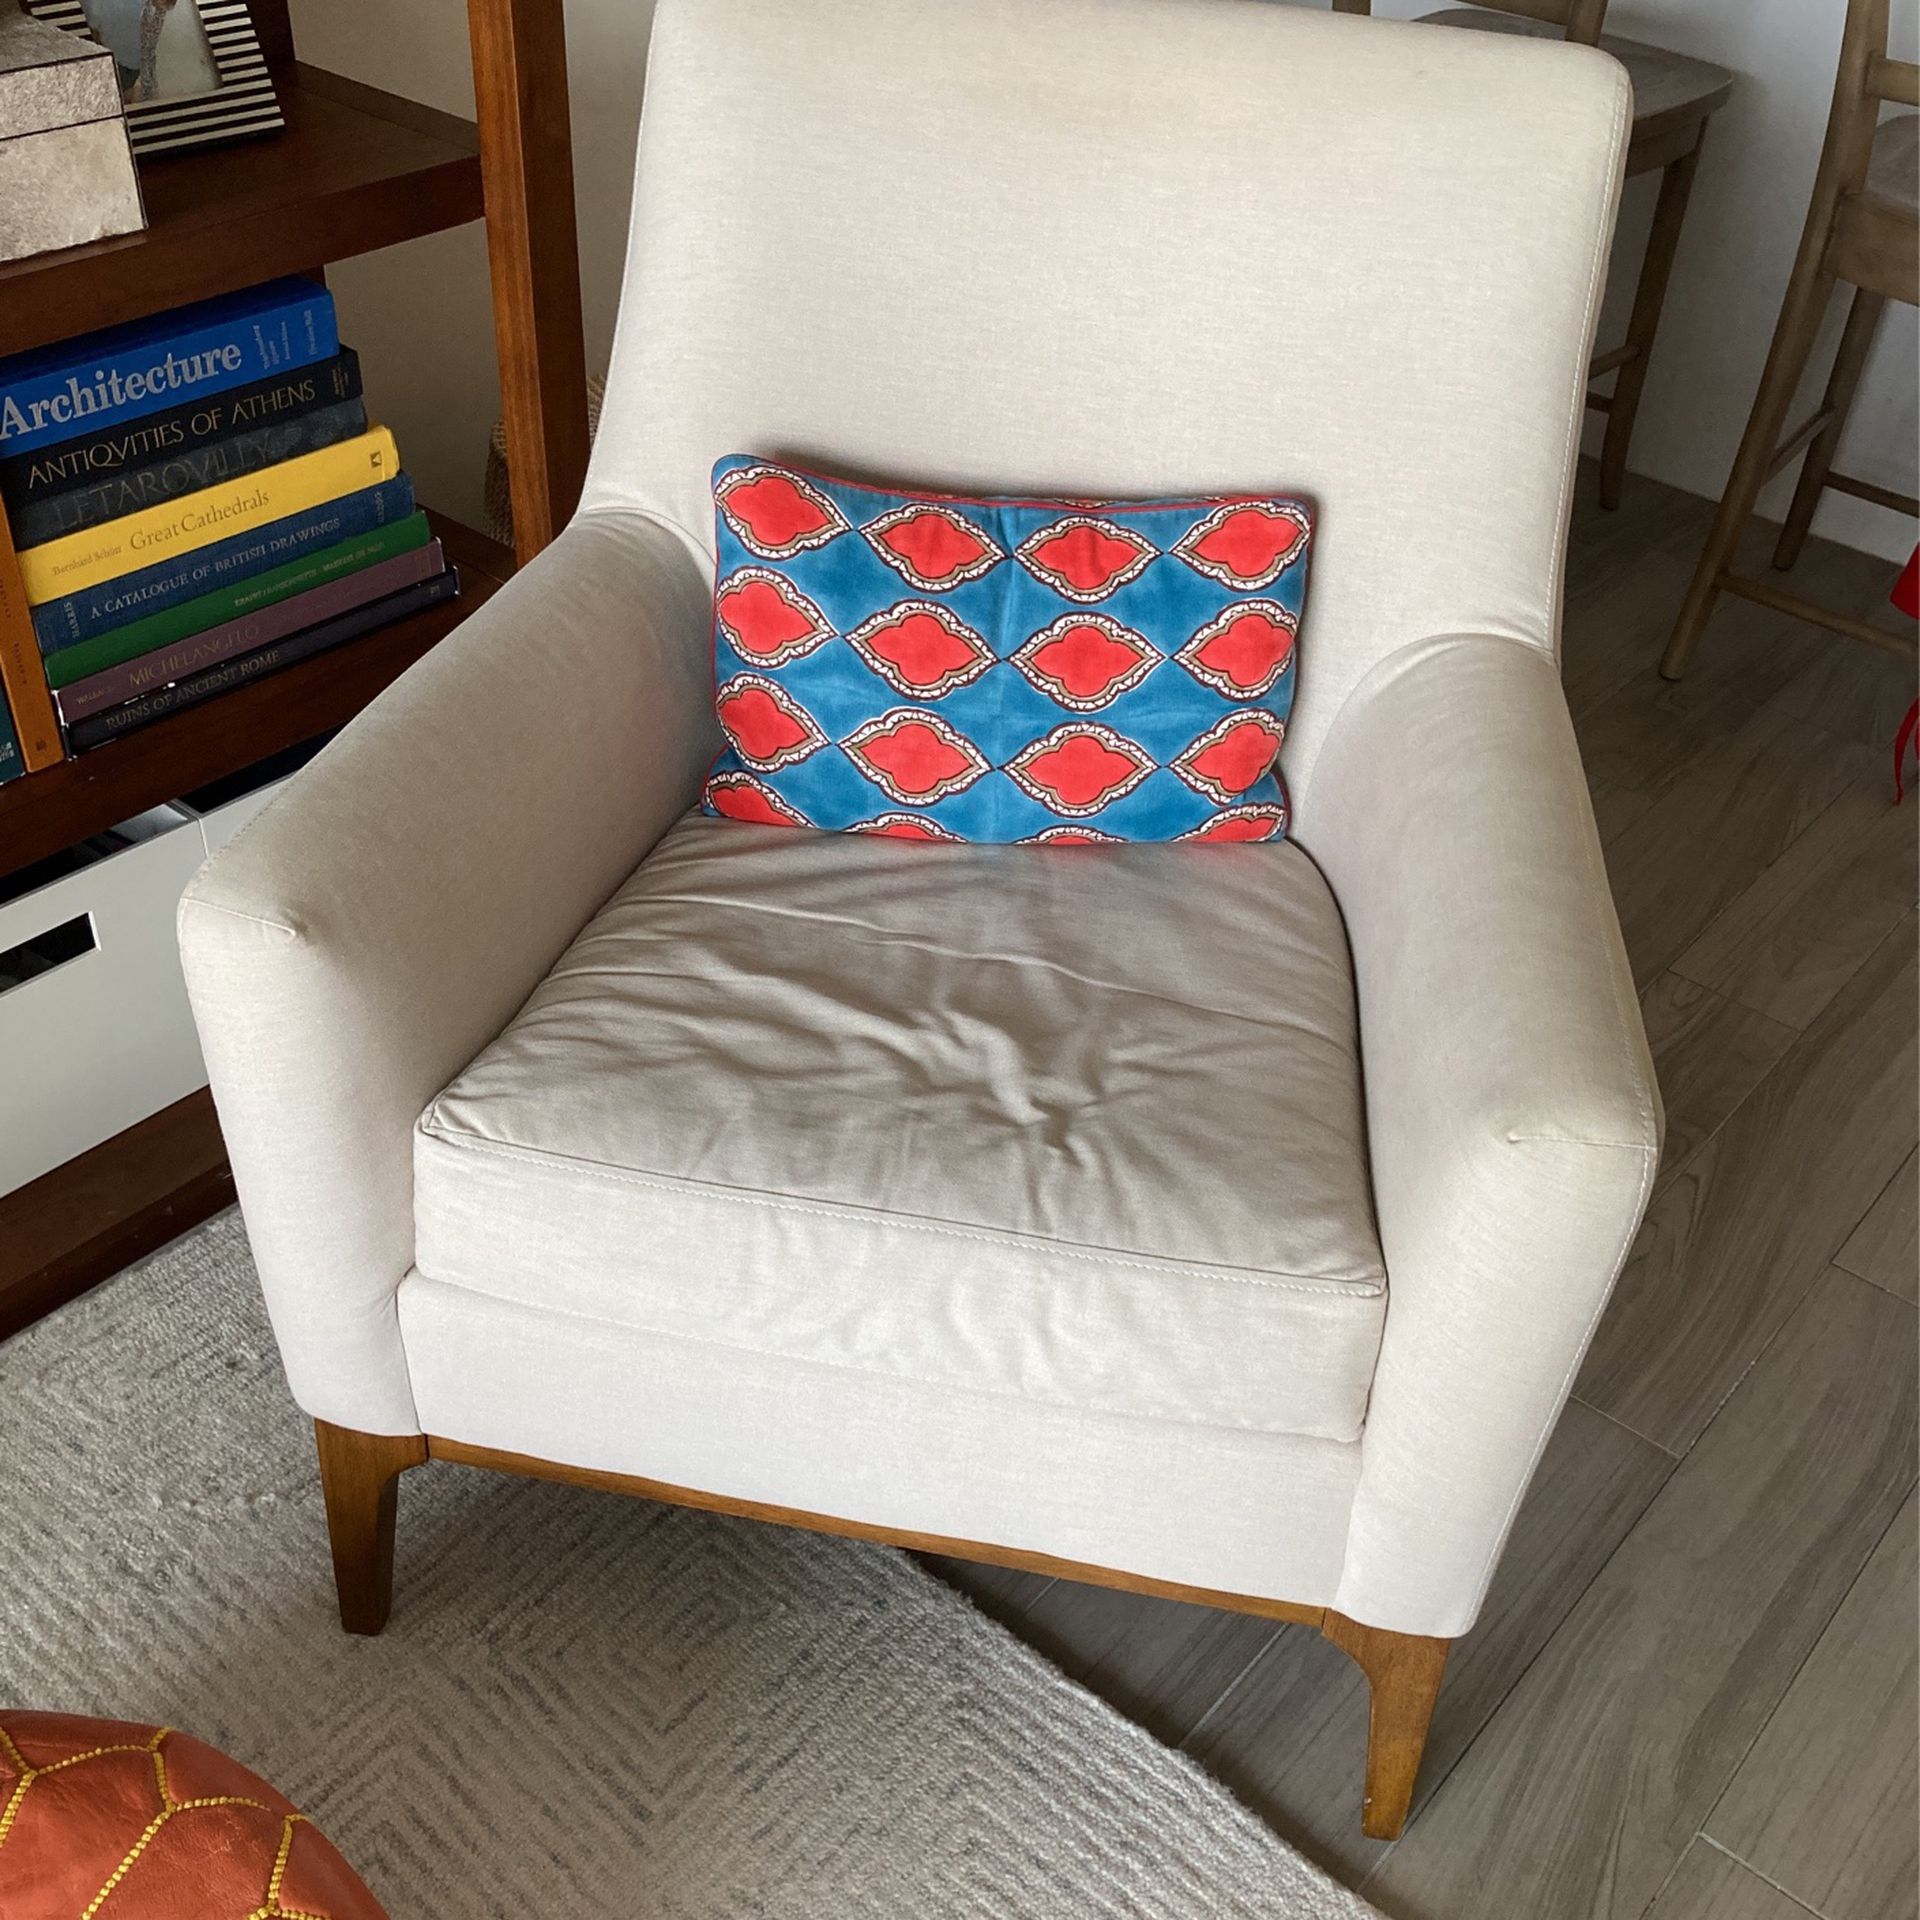 FREE chair from West Elm - Needs to be re-upholstered